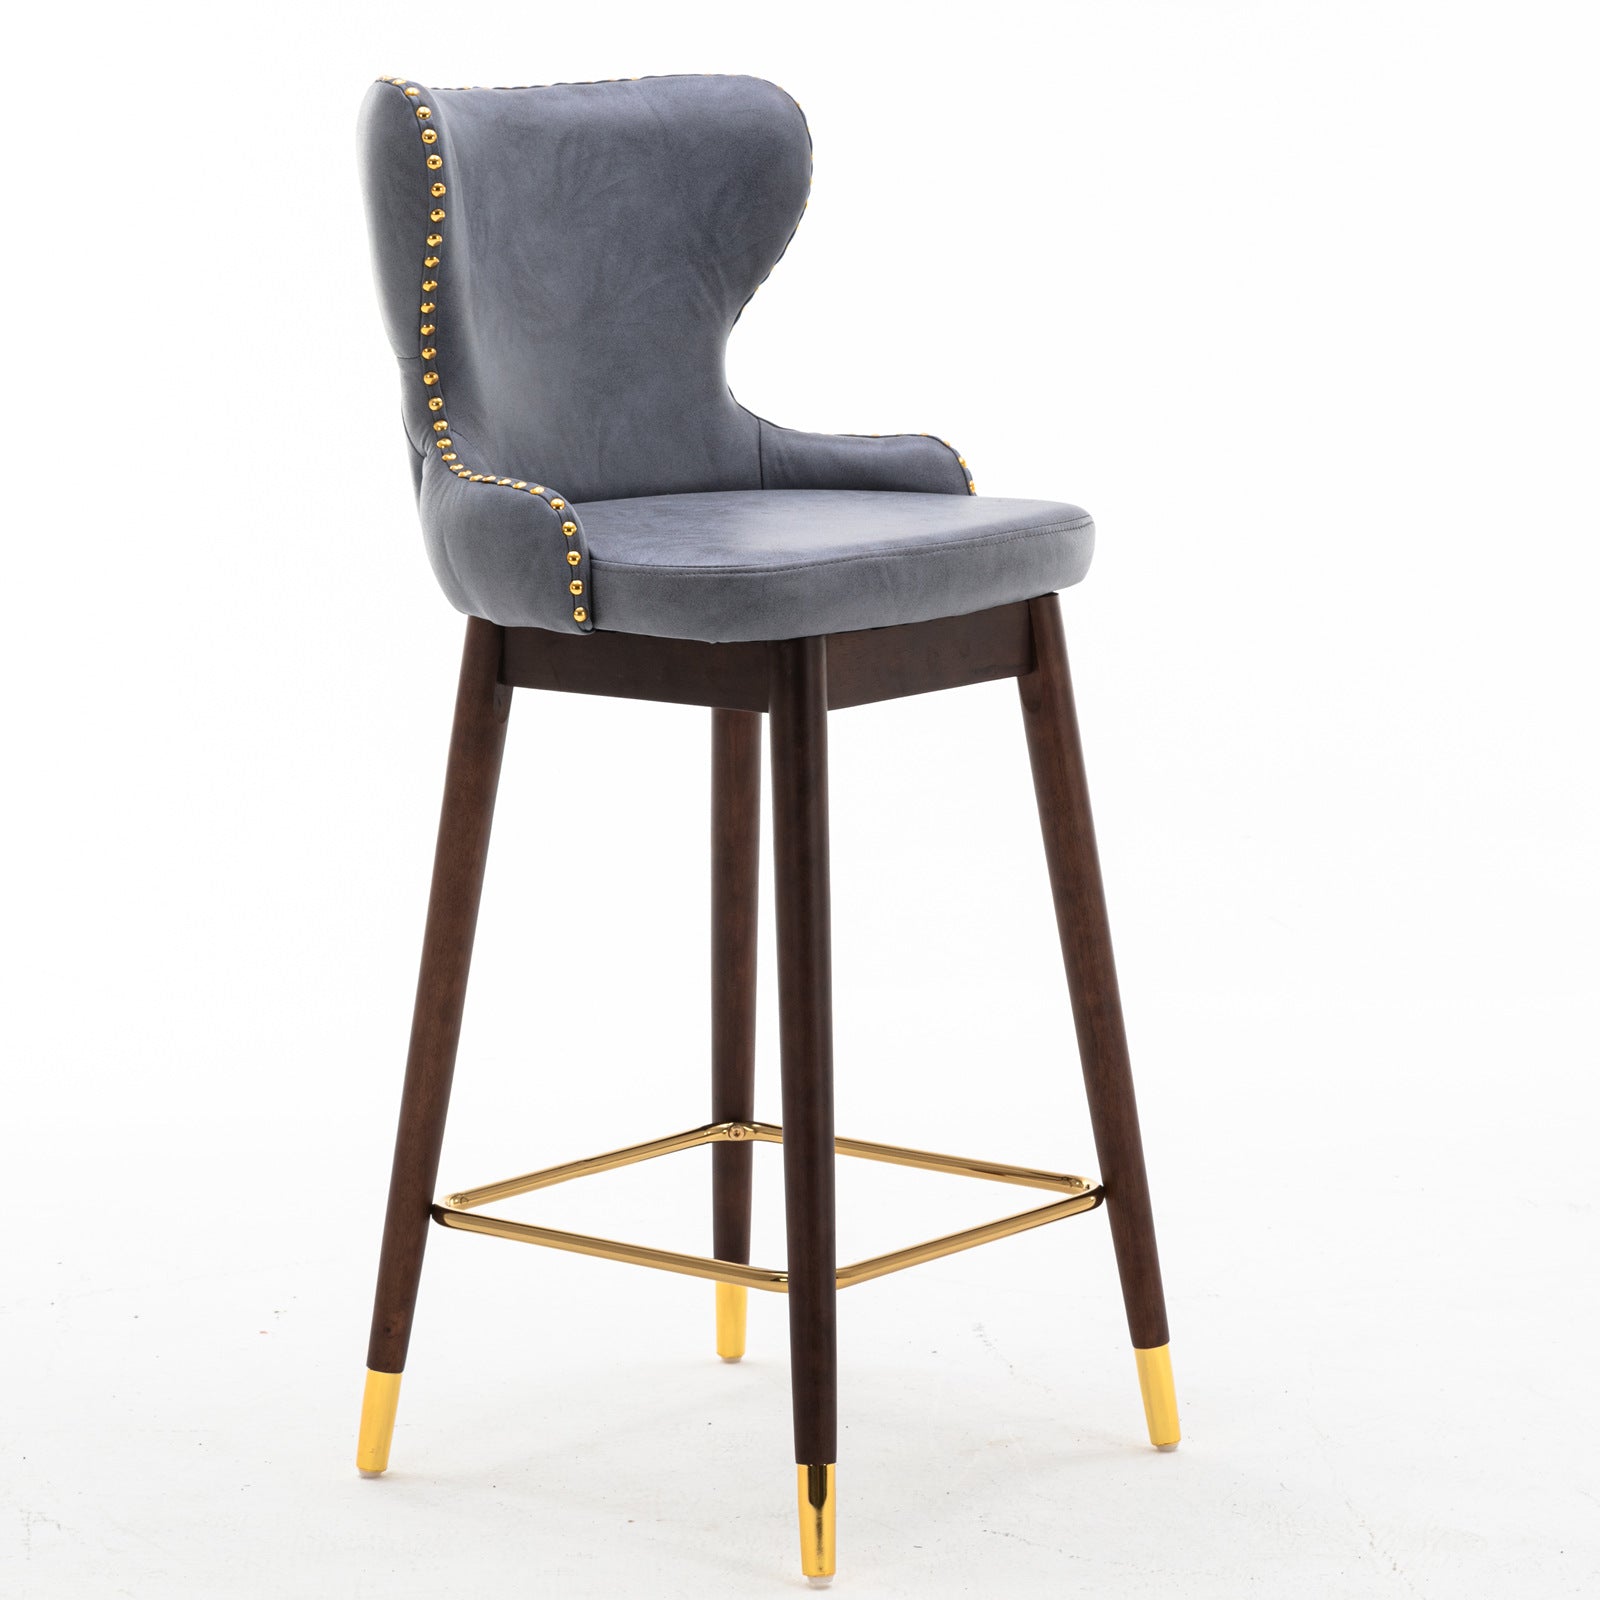 ZNTS A&A Furniture,29.9" Modern Leathaire Fabric bar chairs, Tufted Gold Nailhead Trim Gold Decoration W114342361